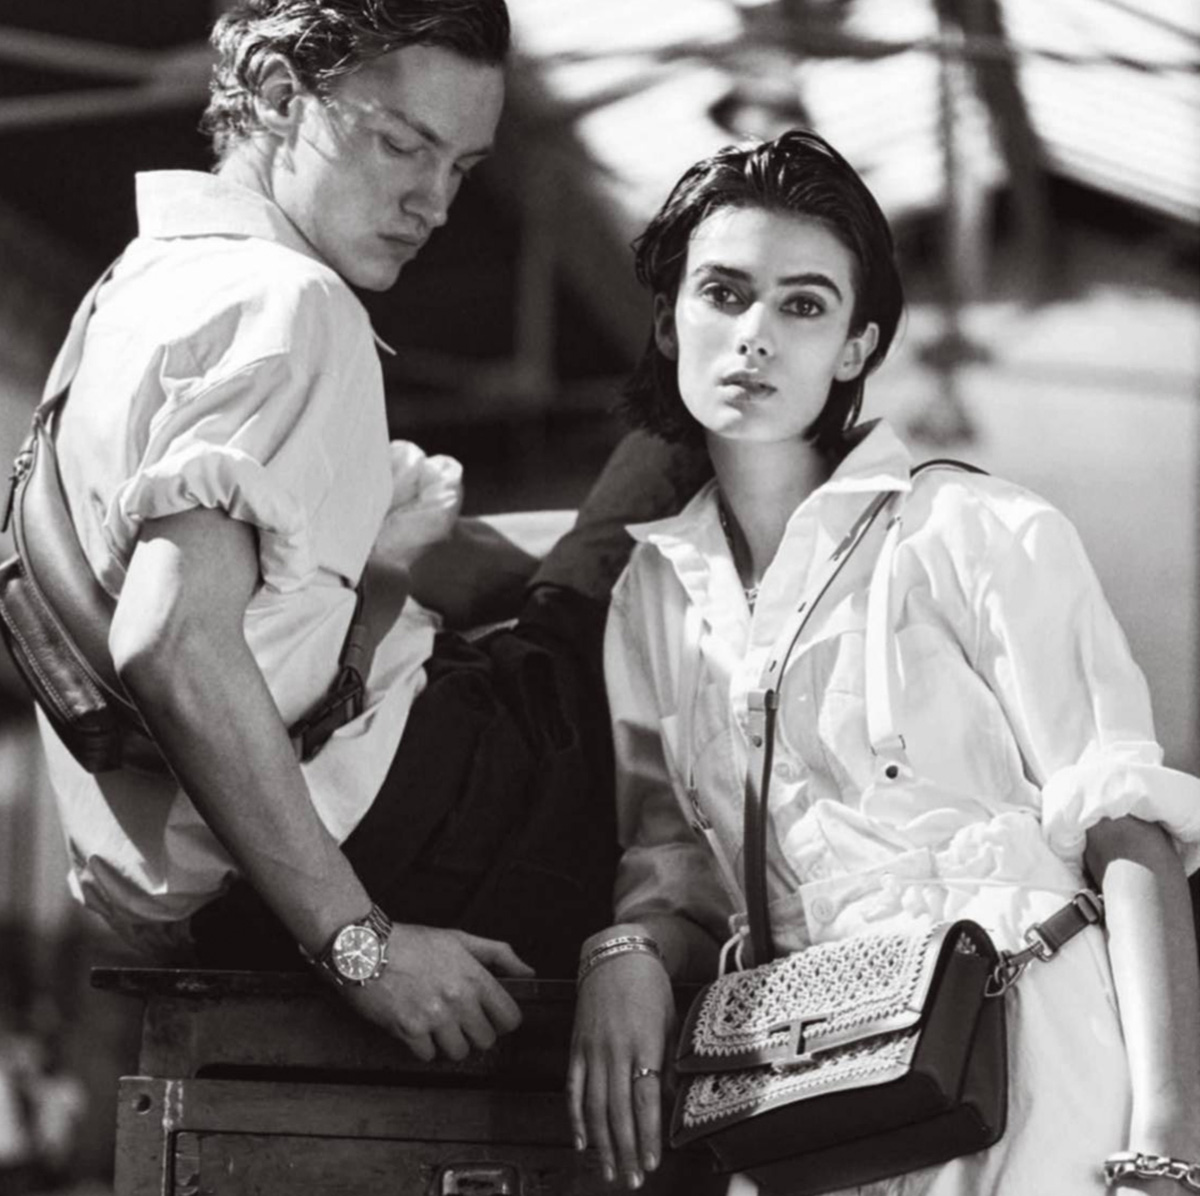 Vitoria Mota and Swann Guerrault by Lise-Anne Marsal for Madame Figaro March 5th, 2021